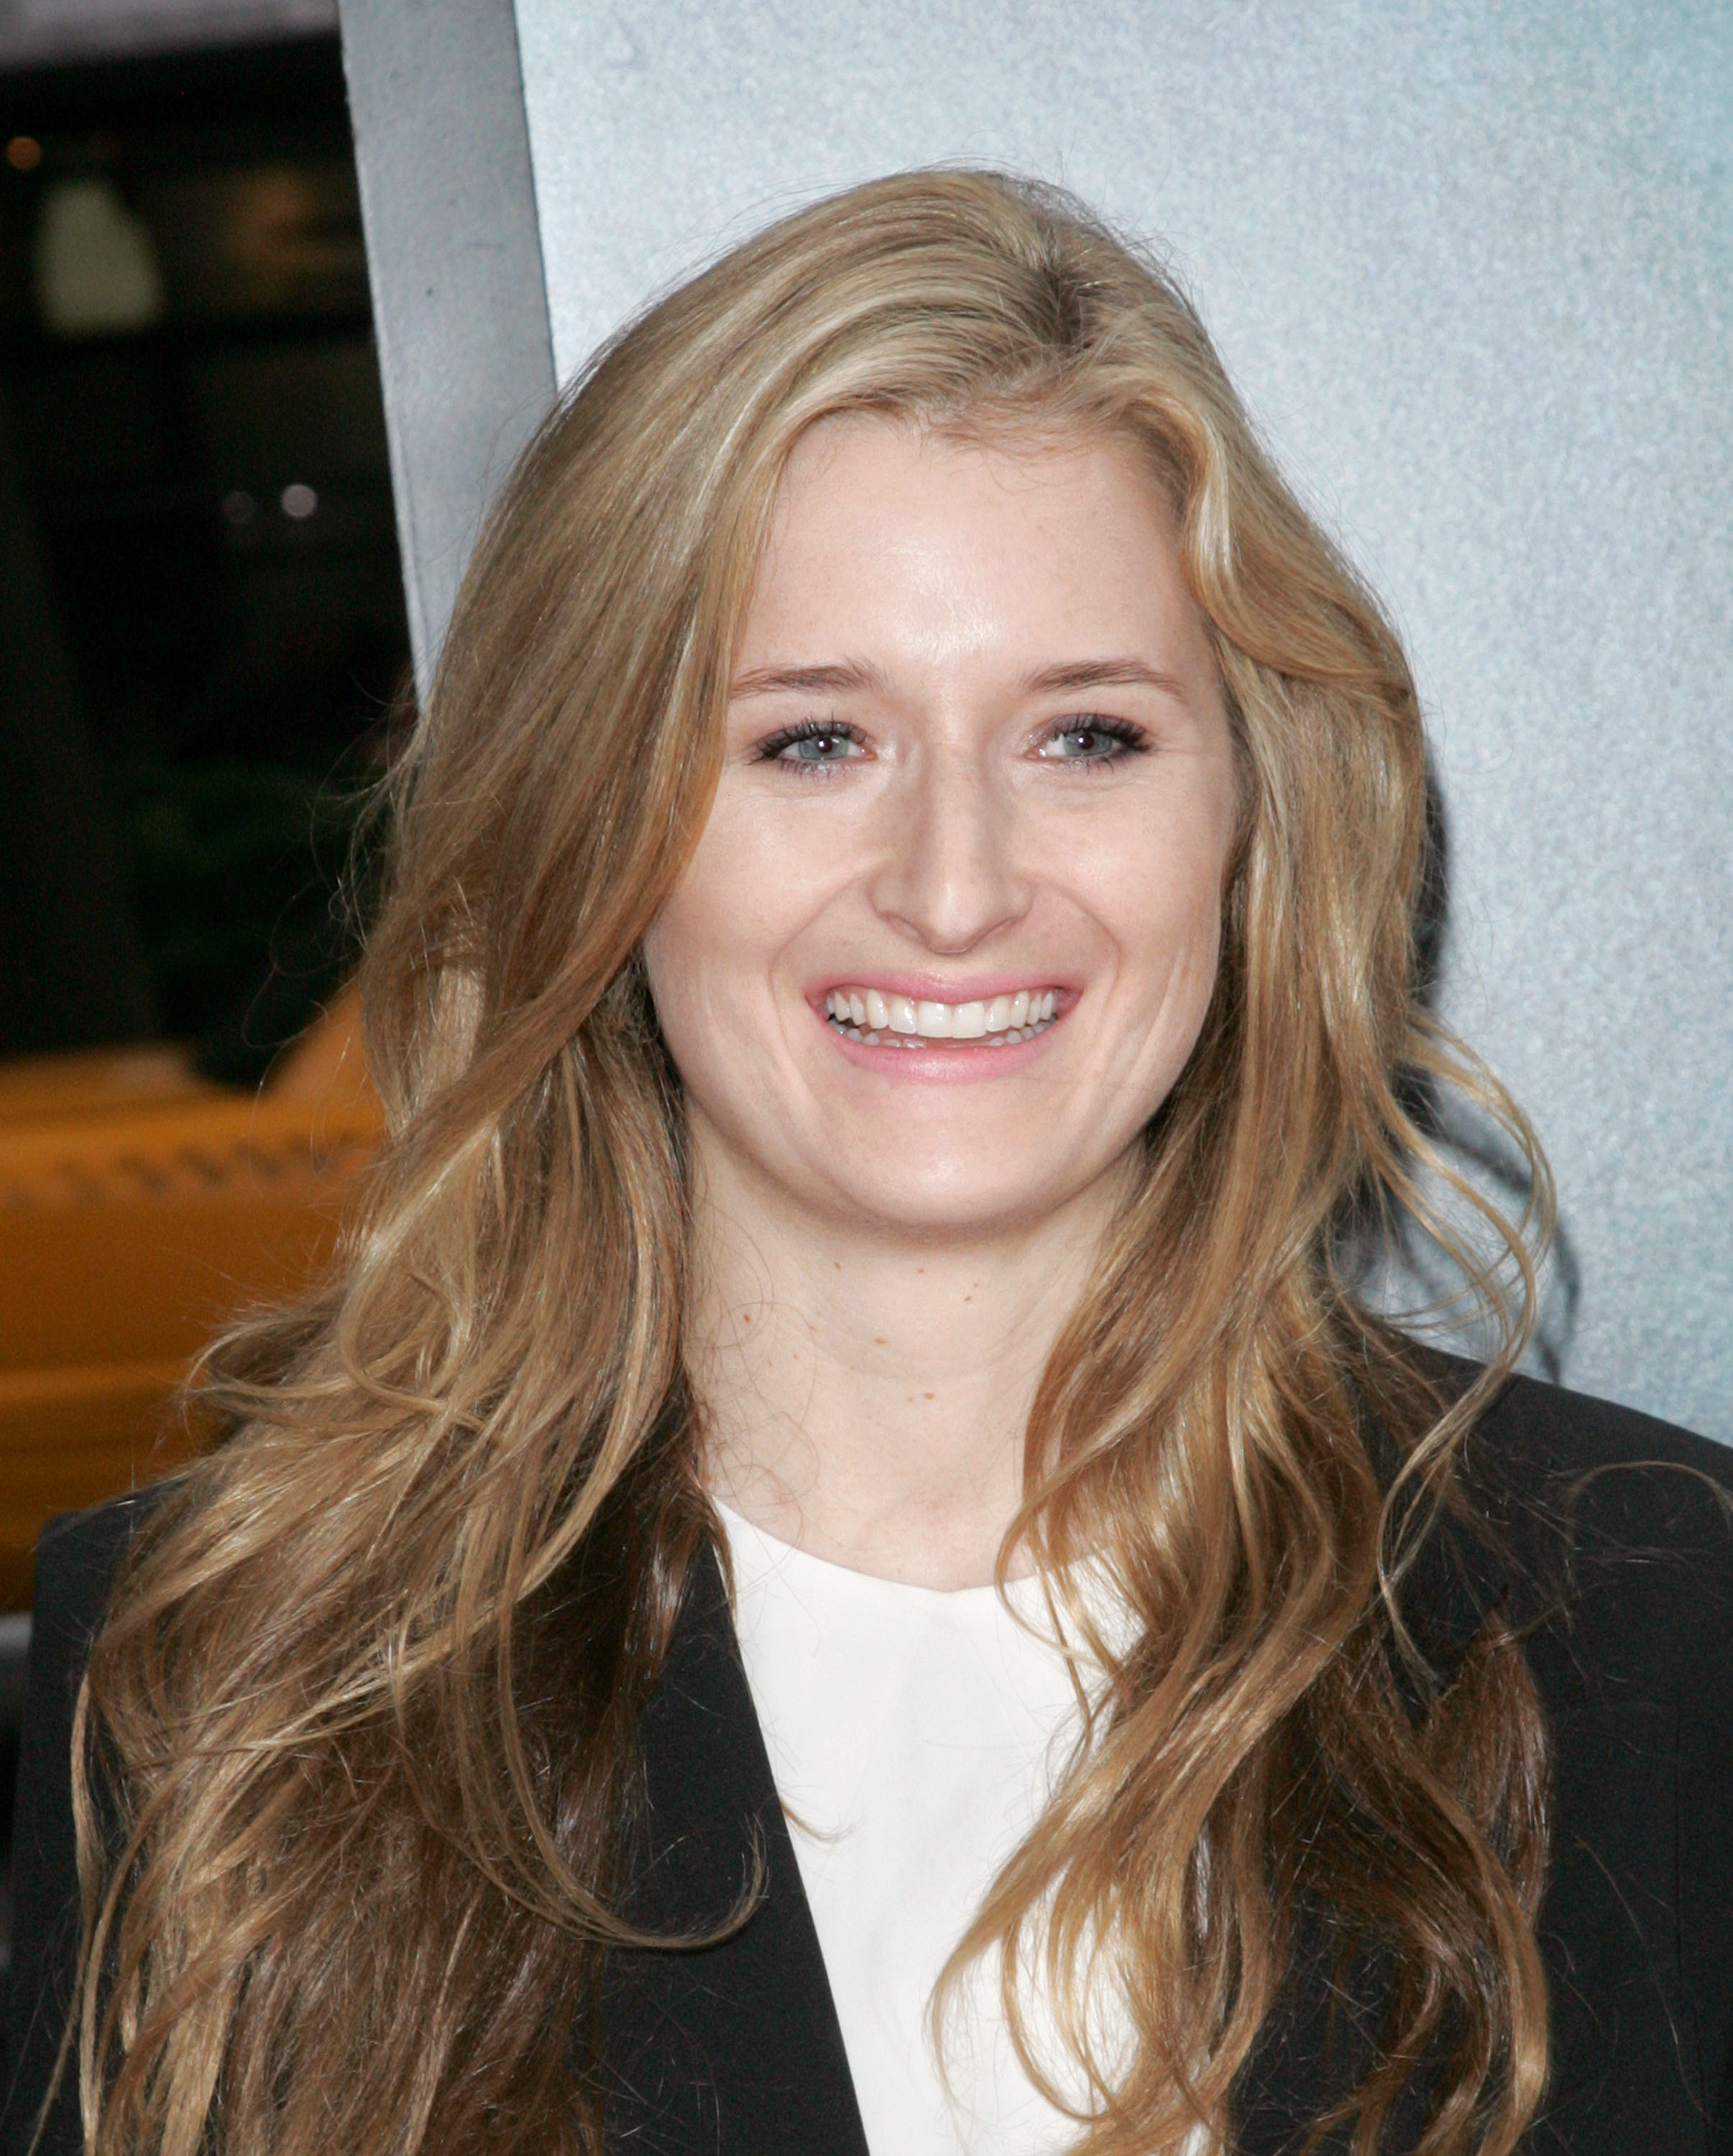 Grace Gummer attends the "Abraham Lincoln: Vampire Hunter" premiere on June 18, 2012 in New York City | Source: Getty Images